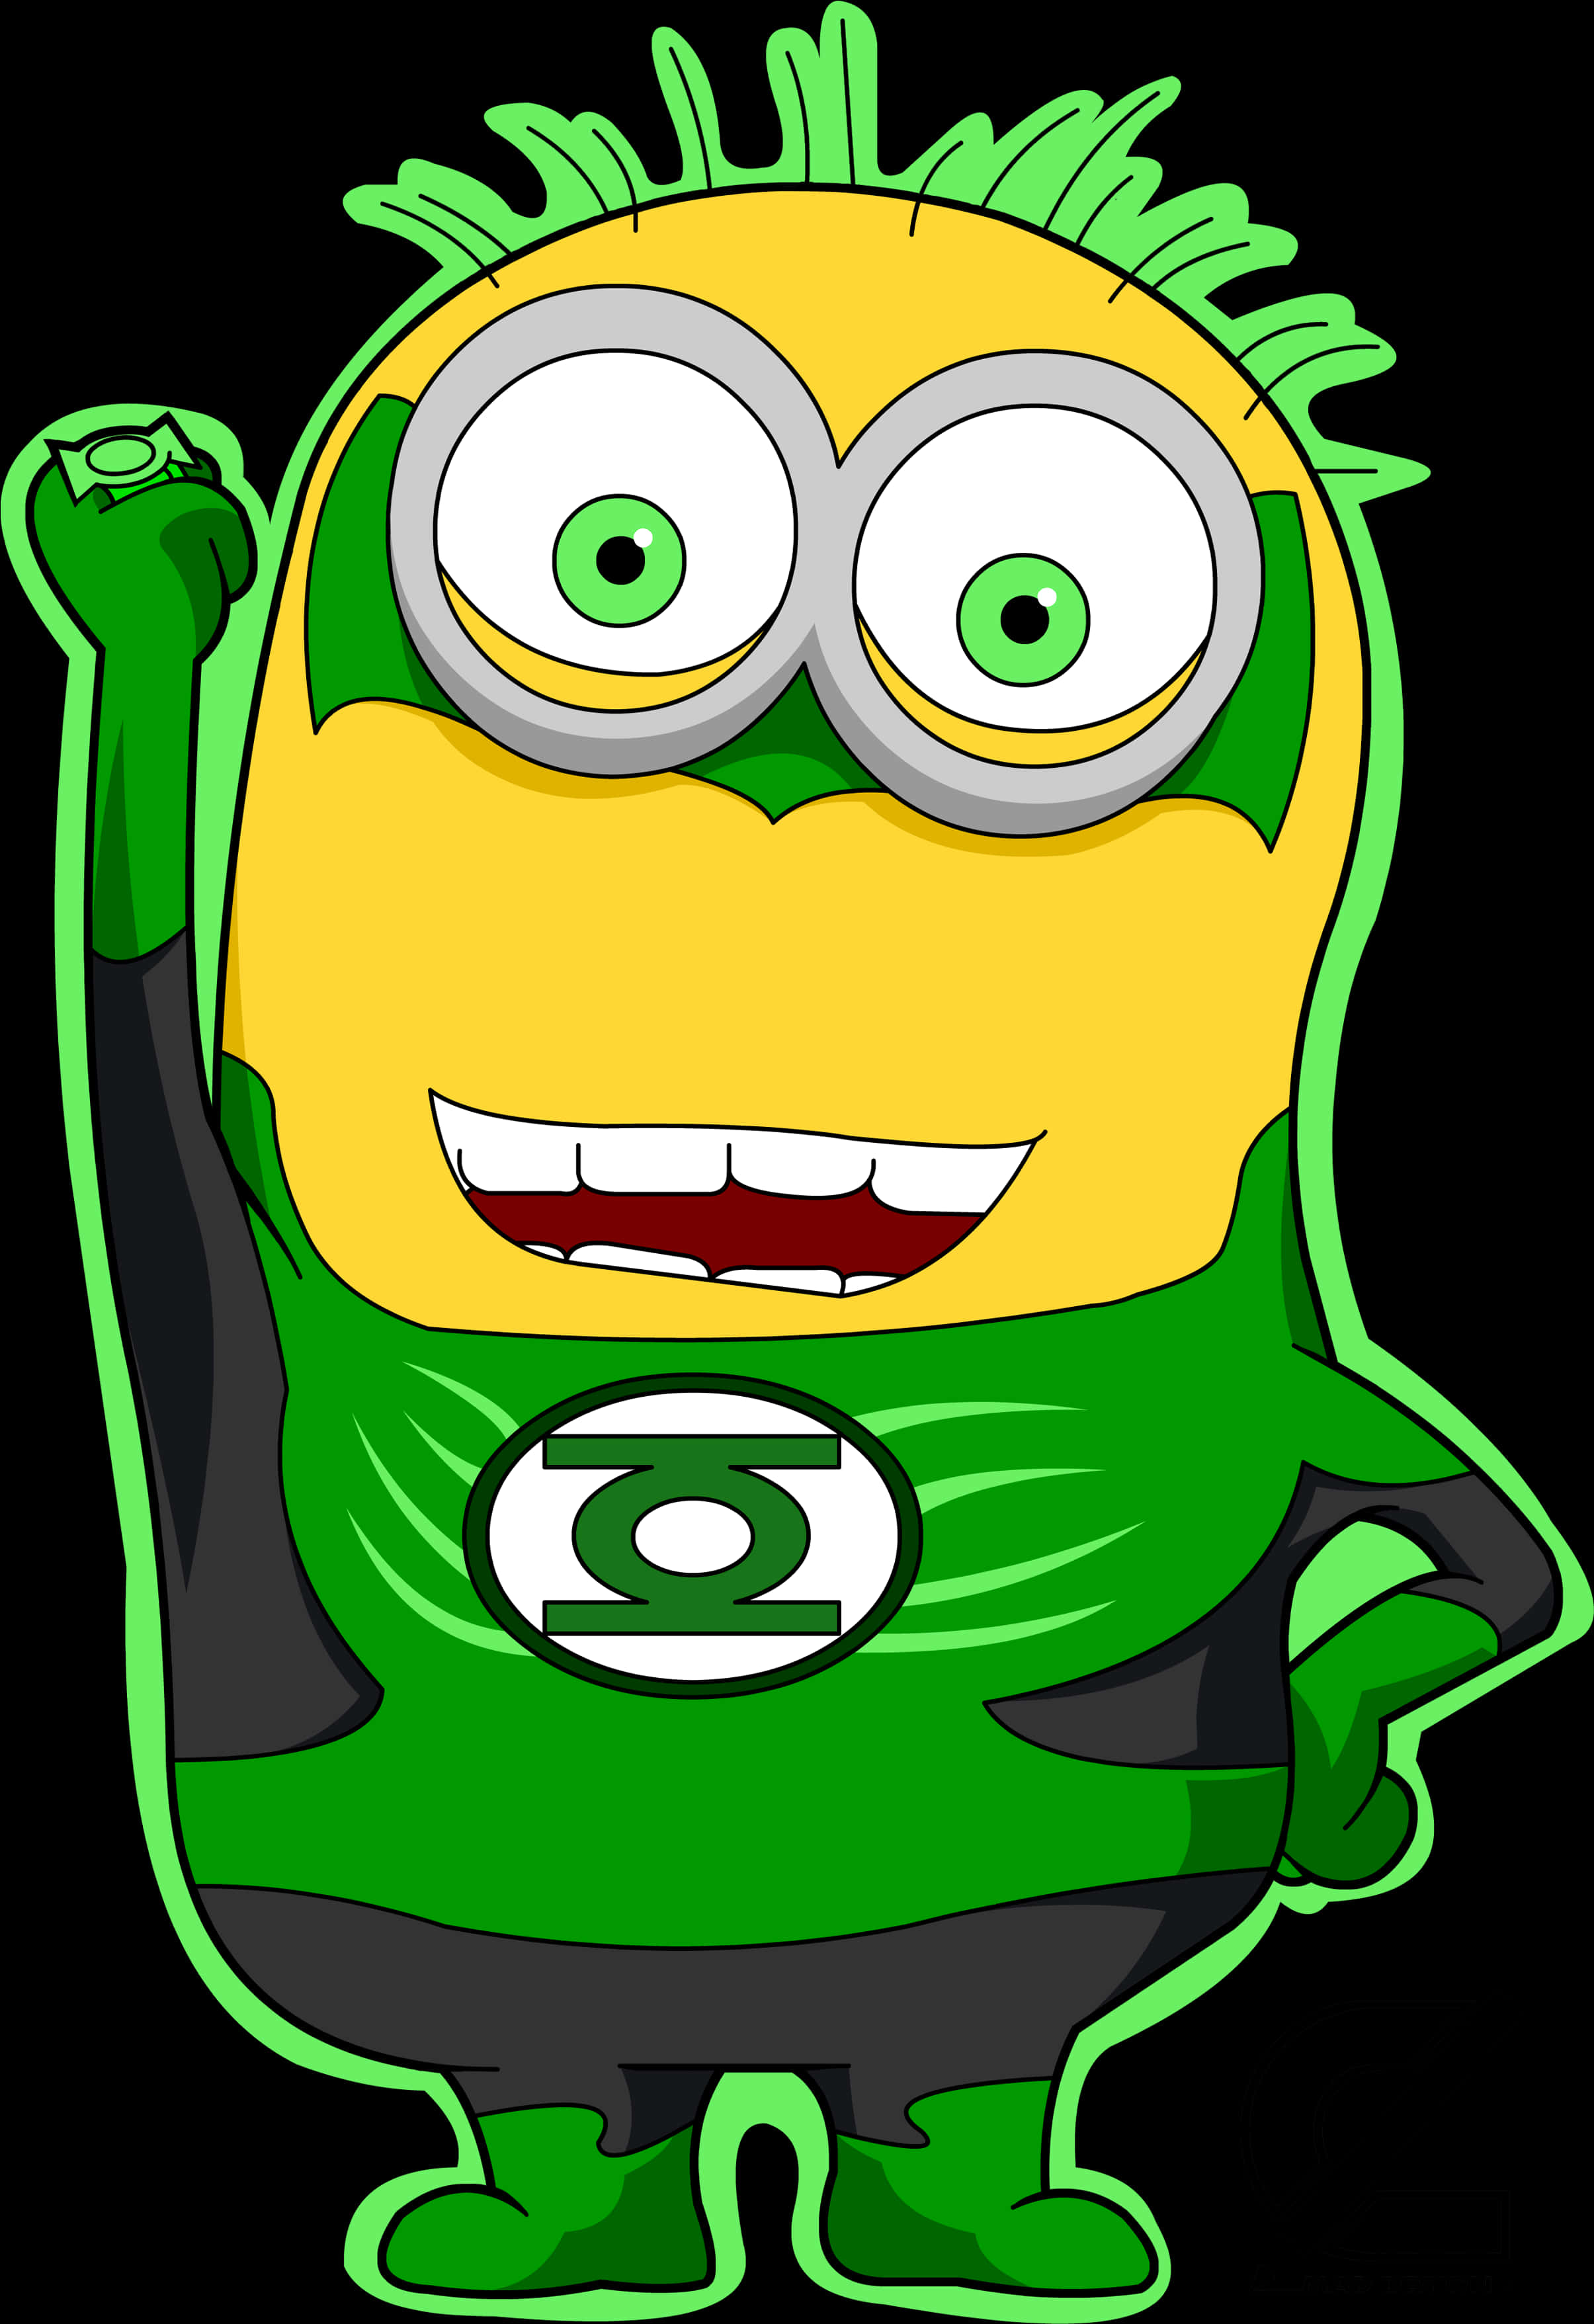 A Cartoon Character Of A Green And Yellow Character